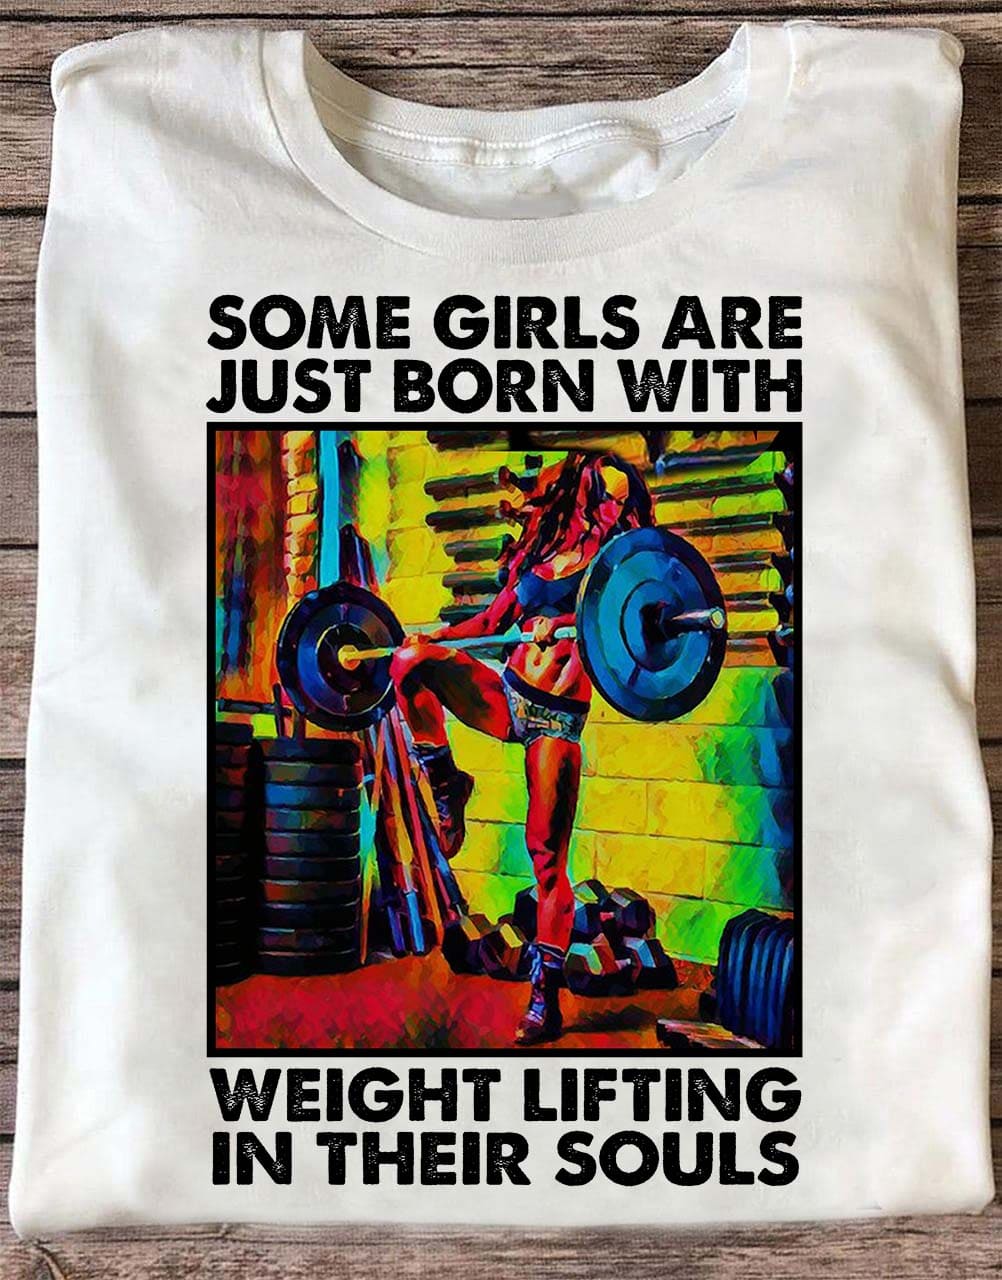 Some girls are just born with weight lifting in their souls - Woman doing lifting, lifting for health